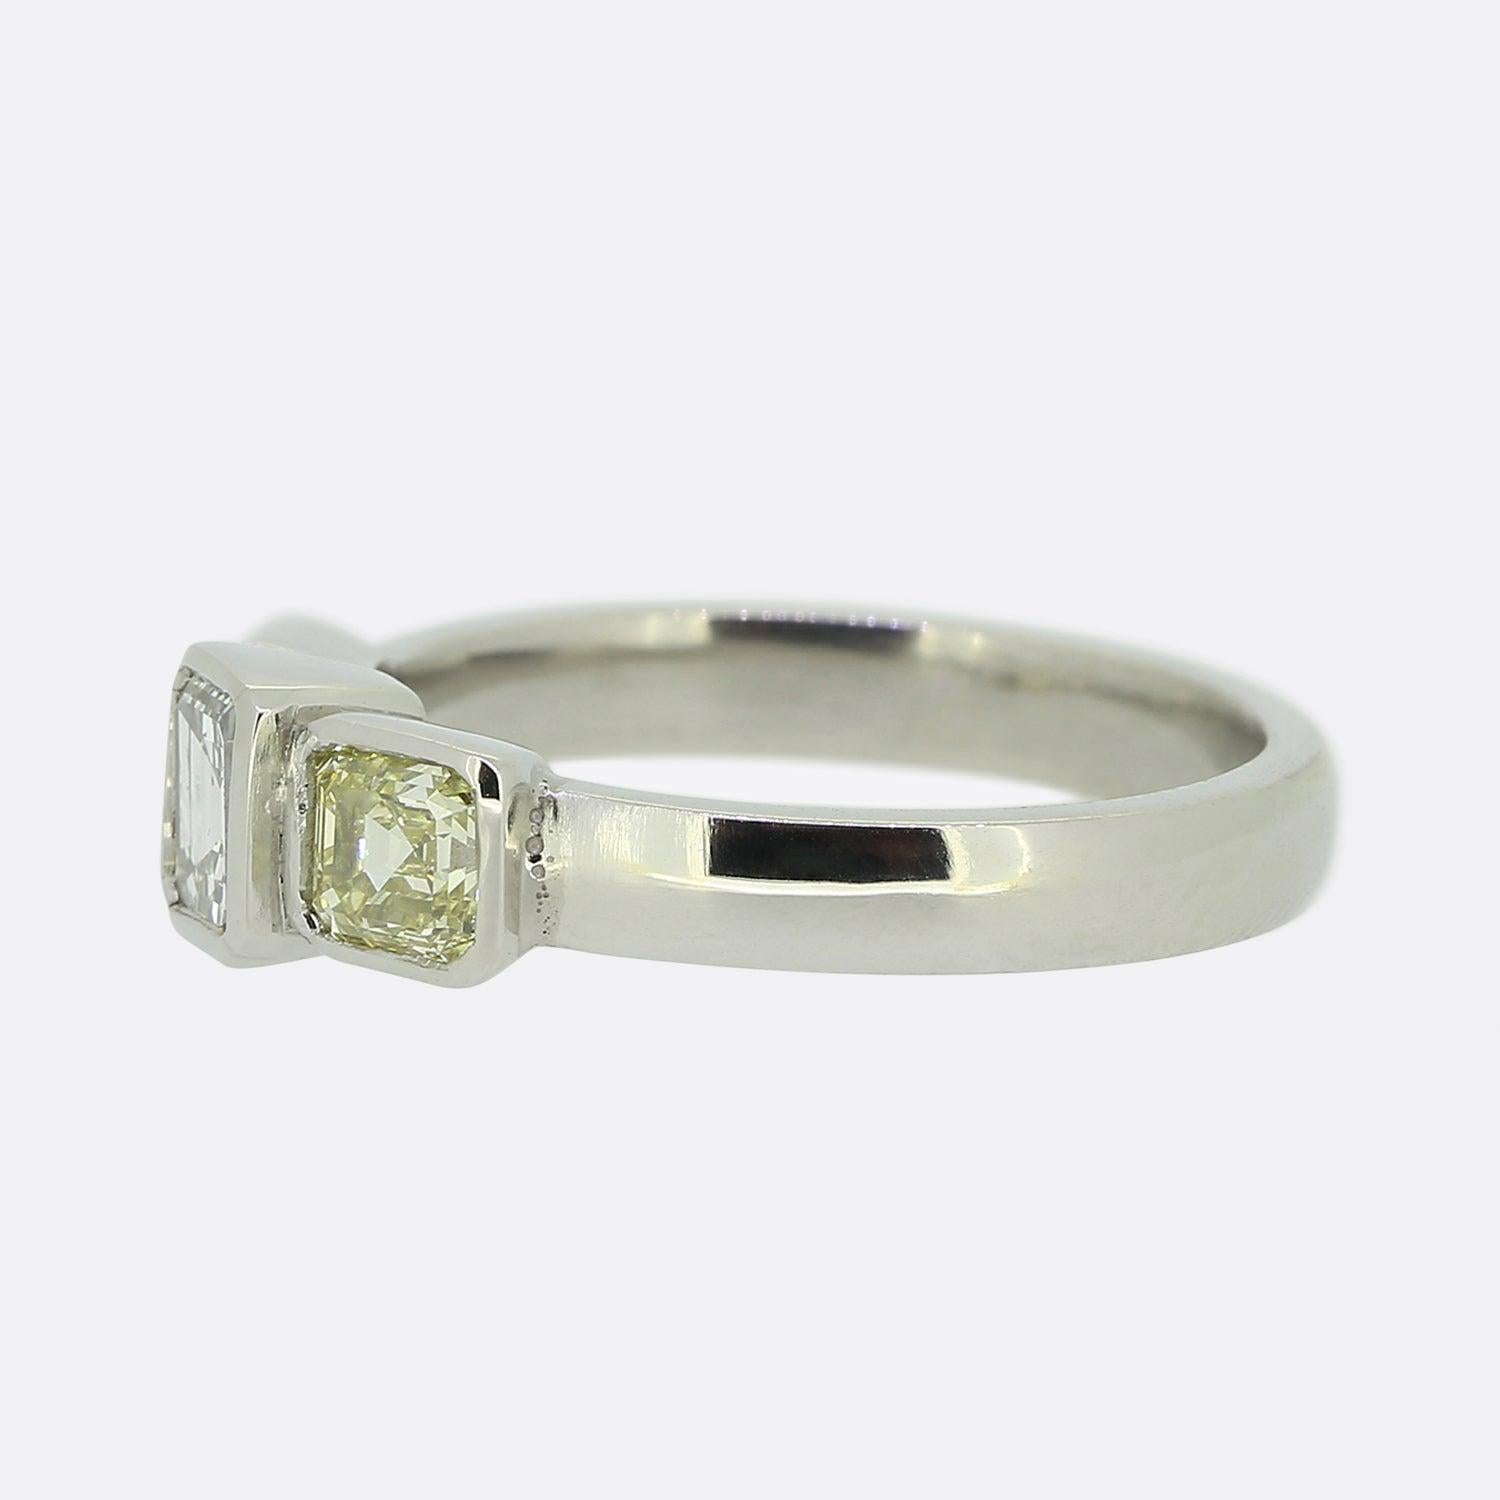 Here we have a fabulous three-stone diamond ring. At the centre sits a bright white asscher cut diamond in a flush rub-over setting. This proud principle stone is then flanked on either side by a single antique fancy yellow asscher cut diamond in a